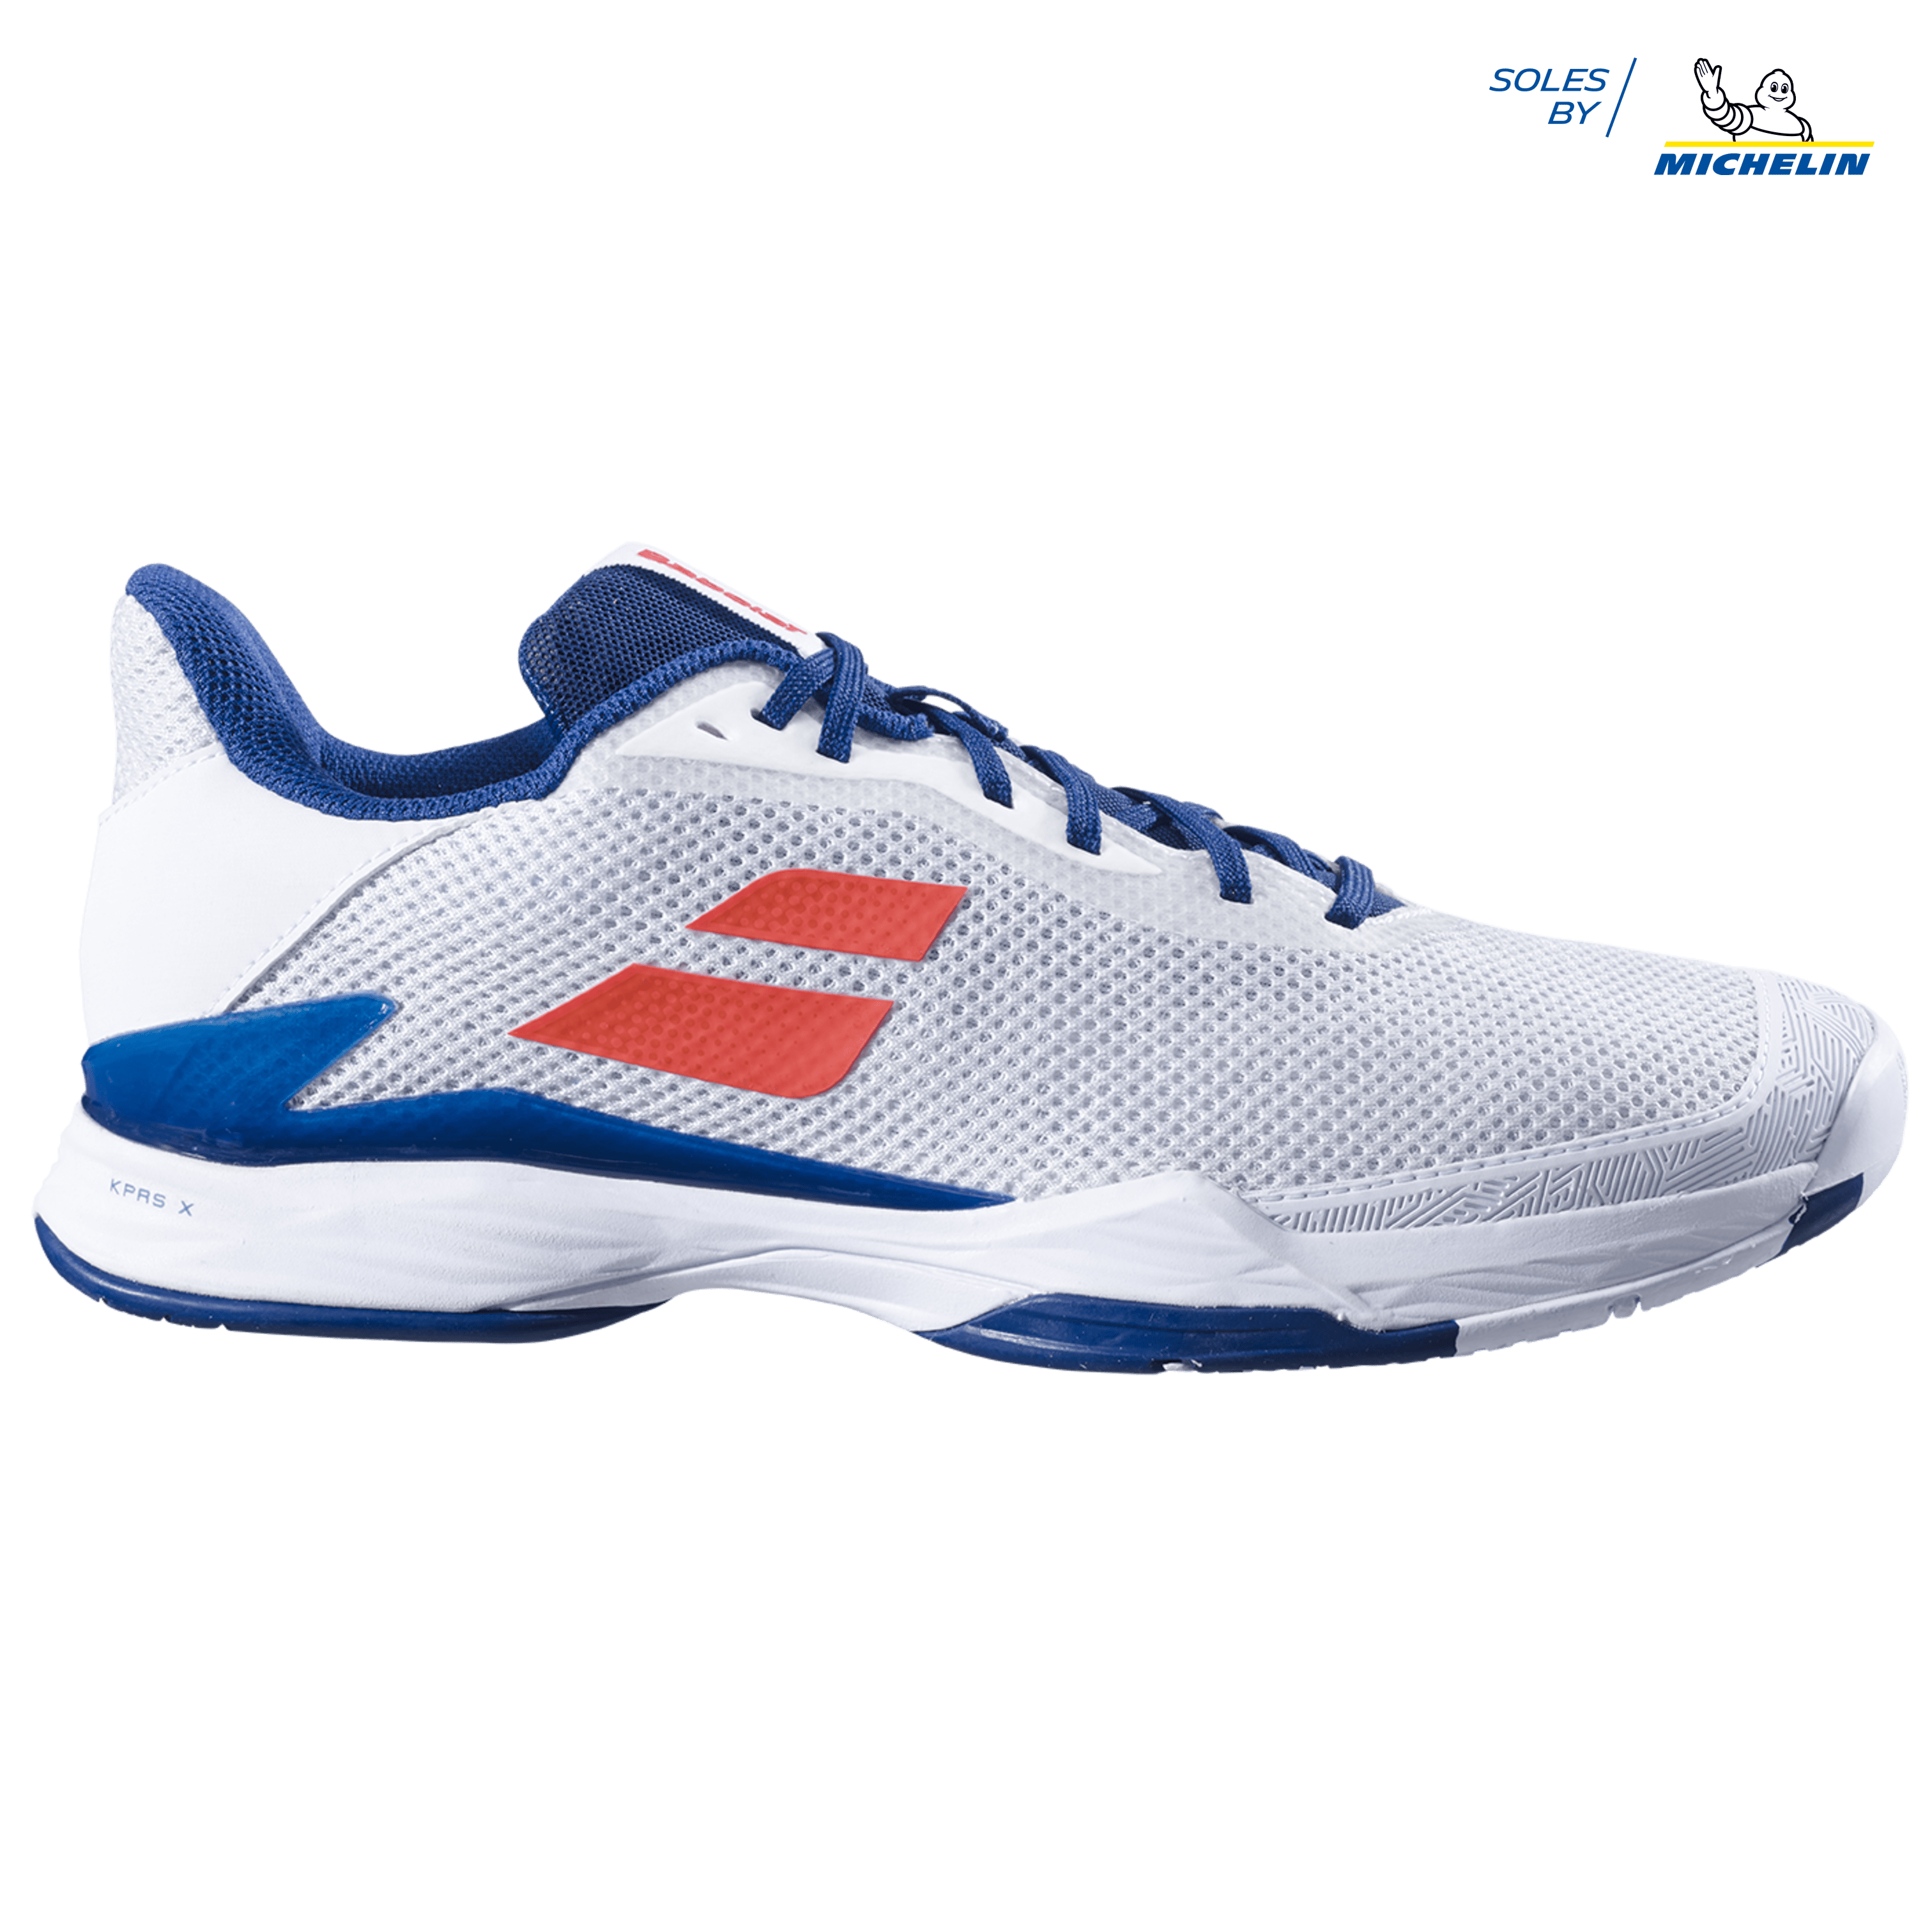 necessity Petitioner I found it Tennis shoes | Jet Tere All Court Men | Babolat